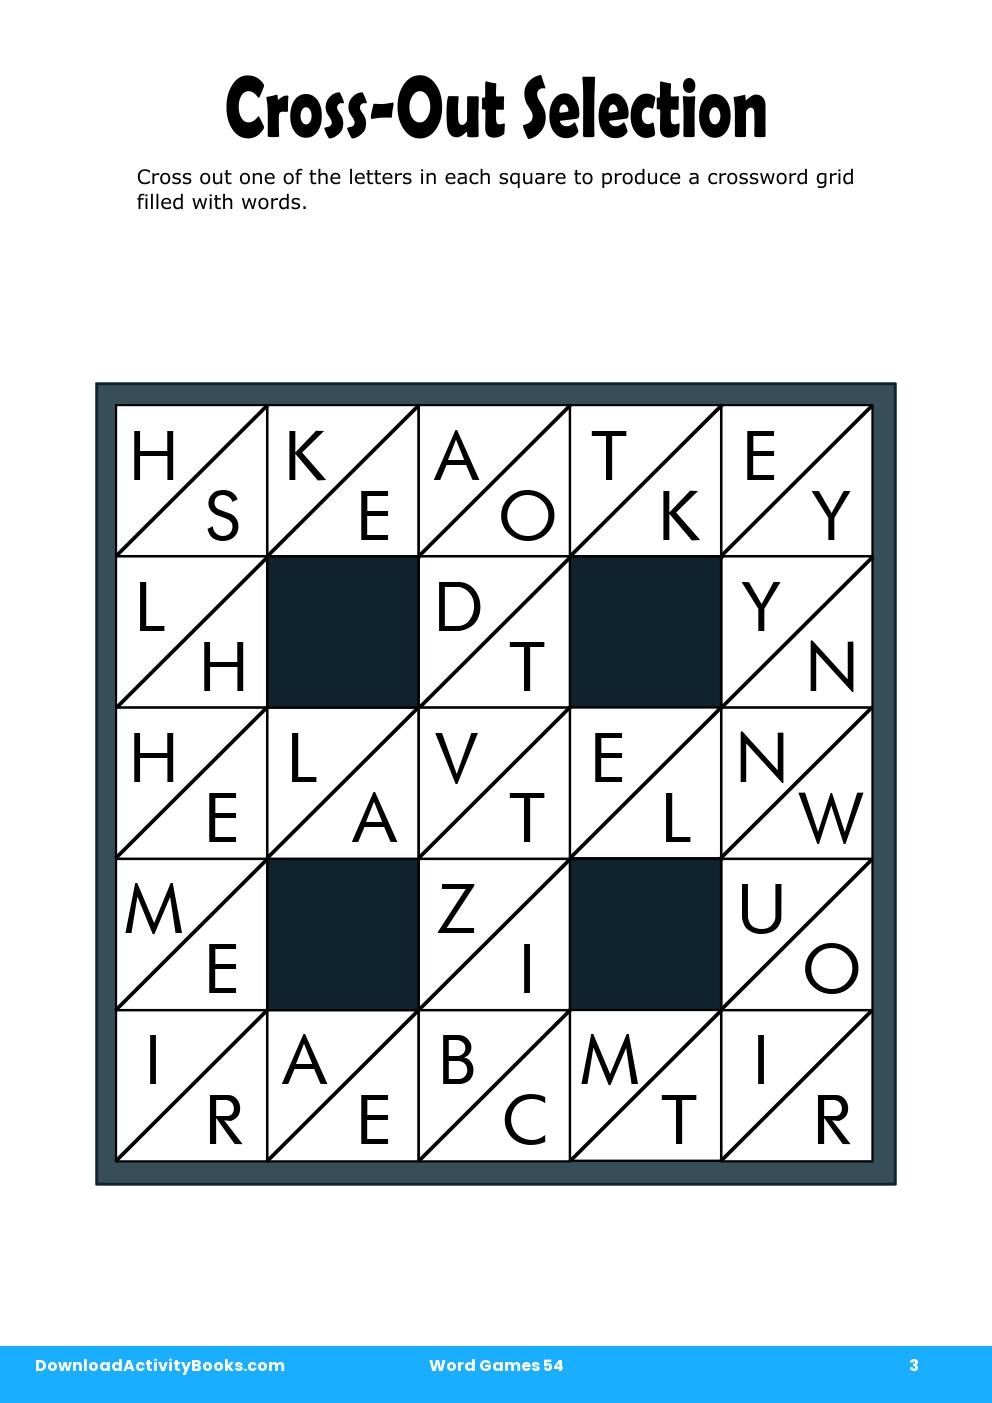 Cross-Out Selection in Word Games 54